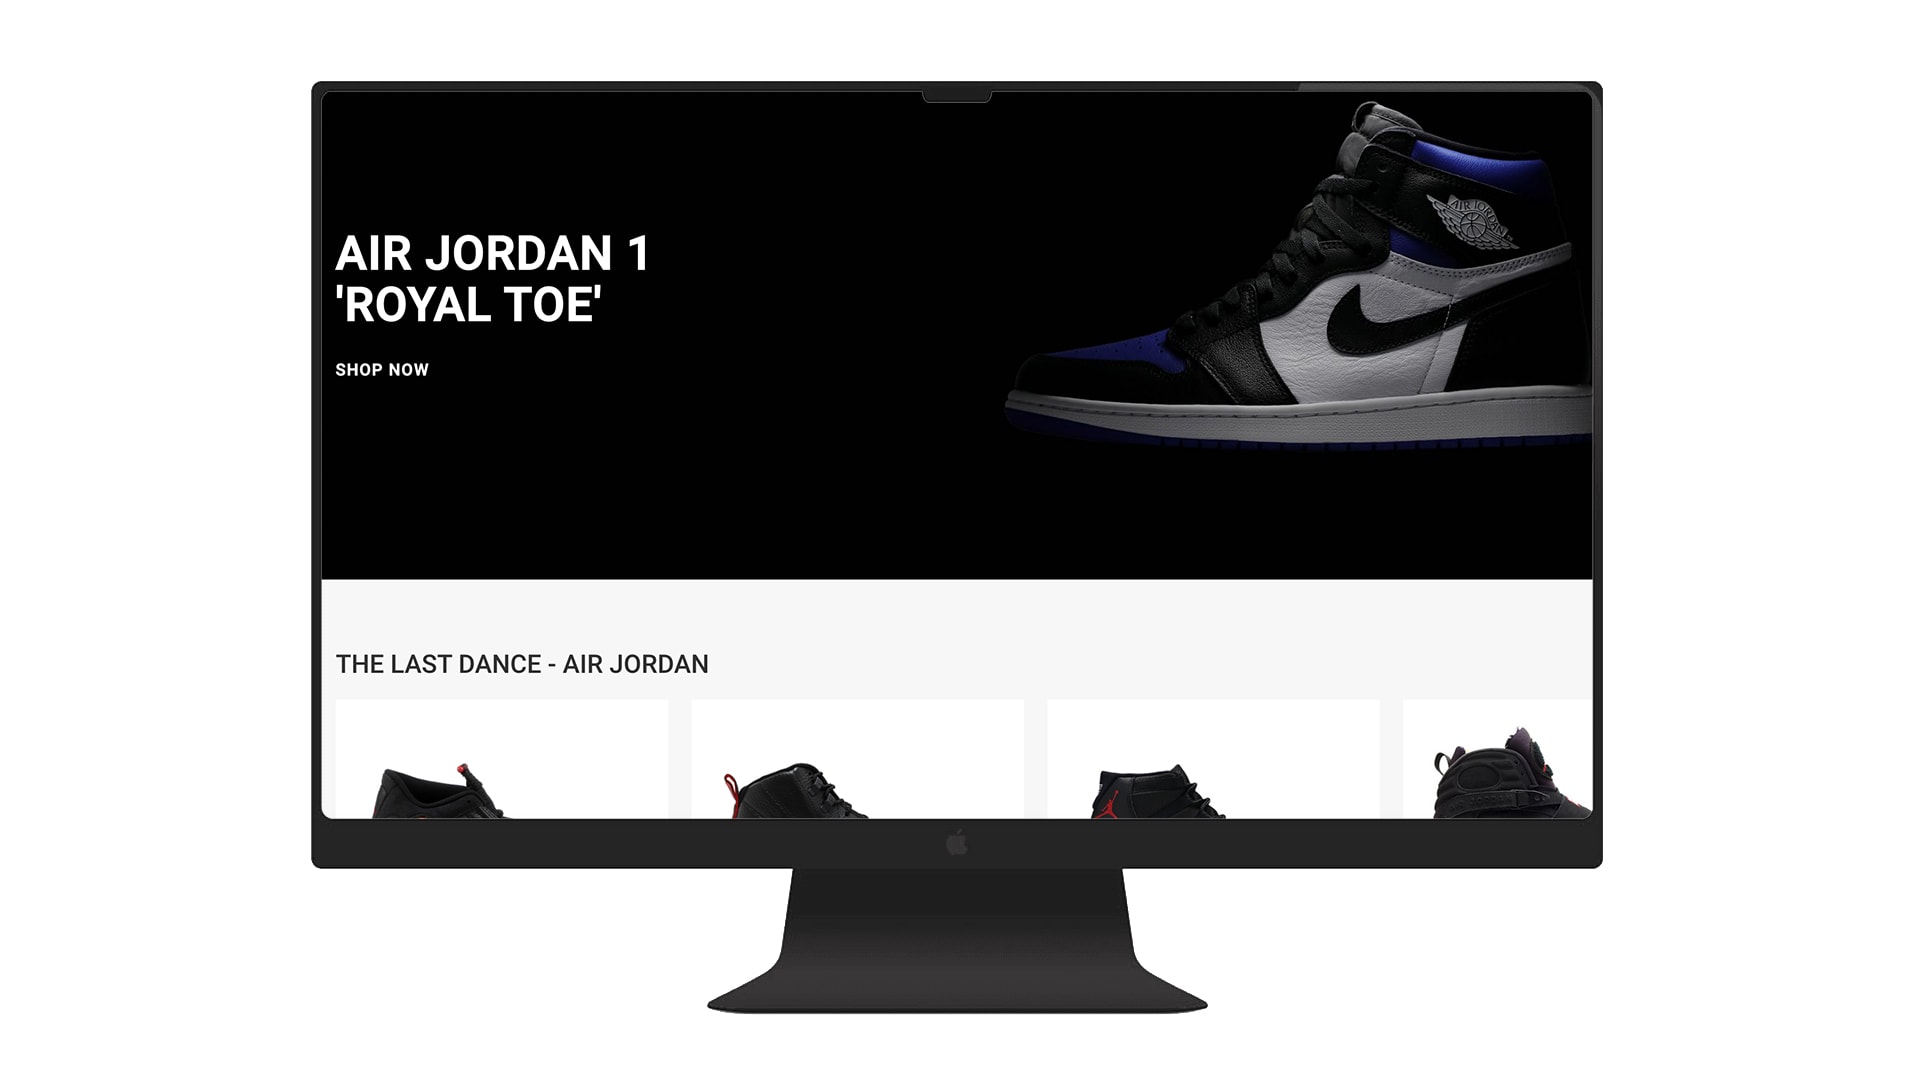 Resell Sites - Sneakers , HD Wallpaper & Backgrounds